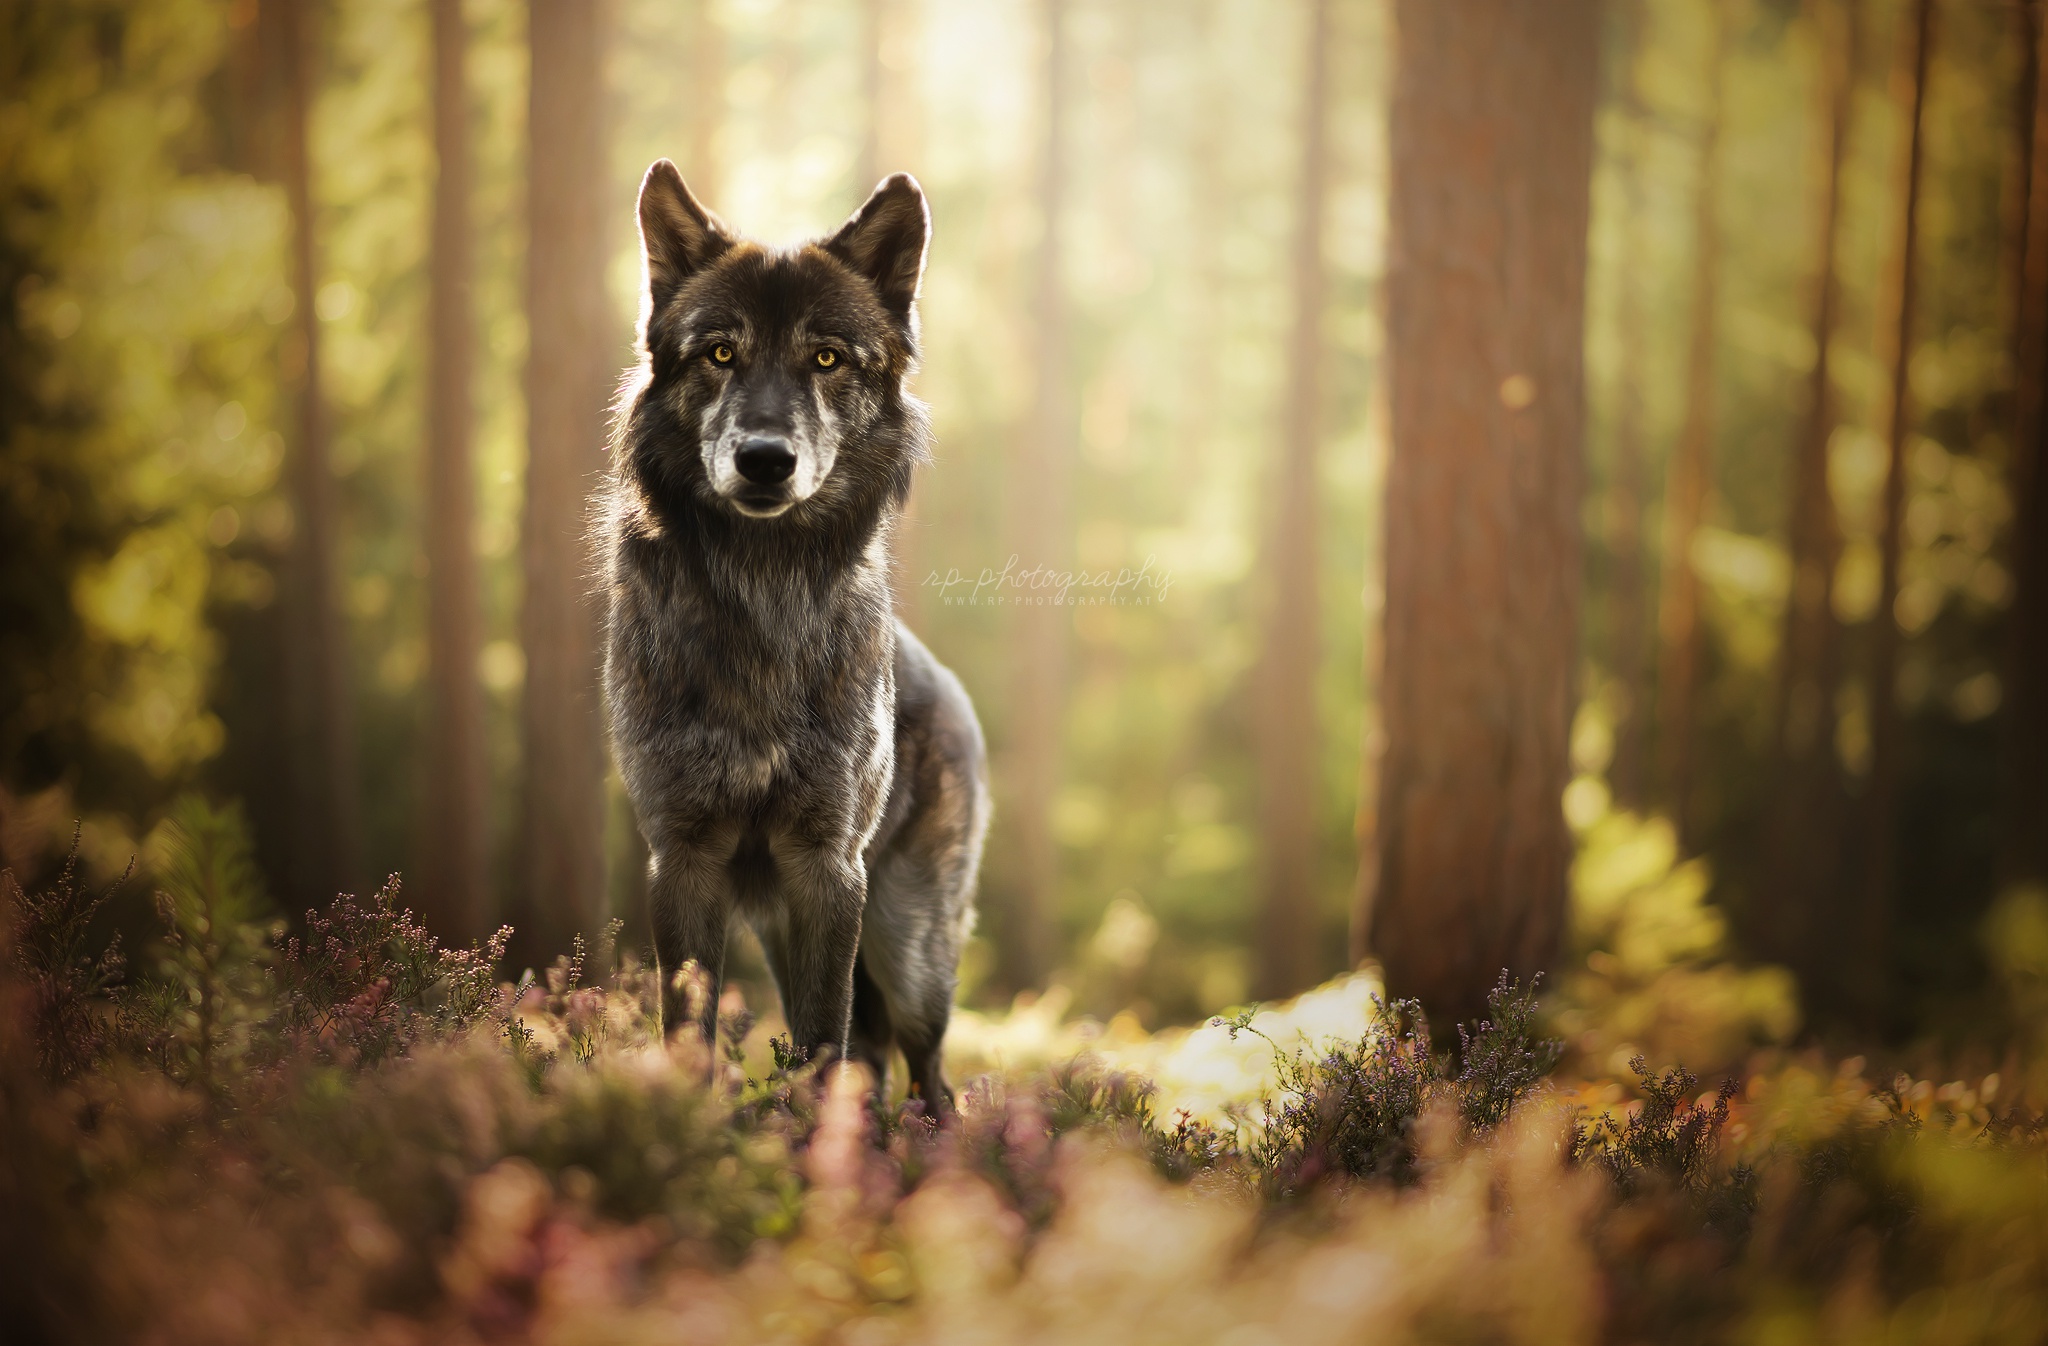 General 2048x1346 nature forest dog animals